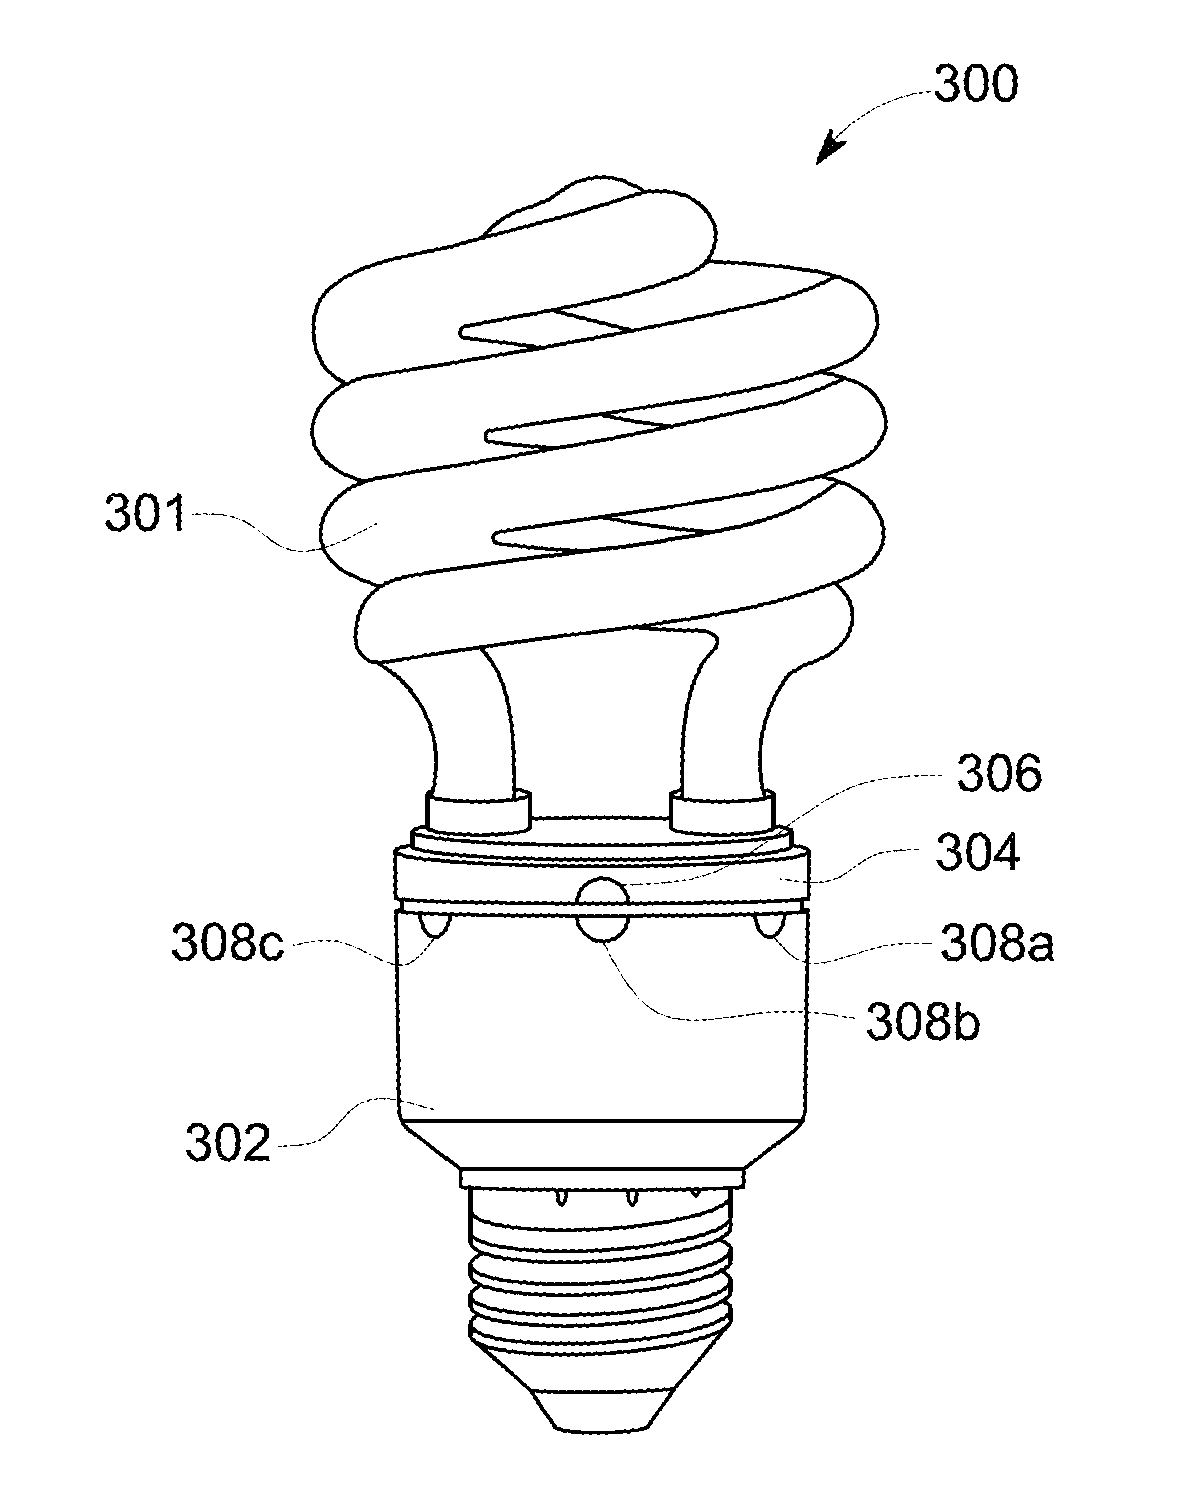 Multi-power level compact fluorescent lamp assembly